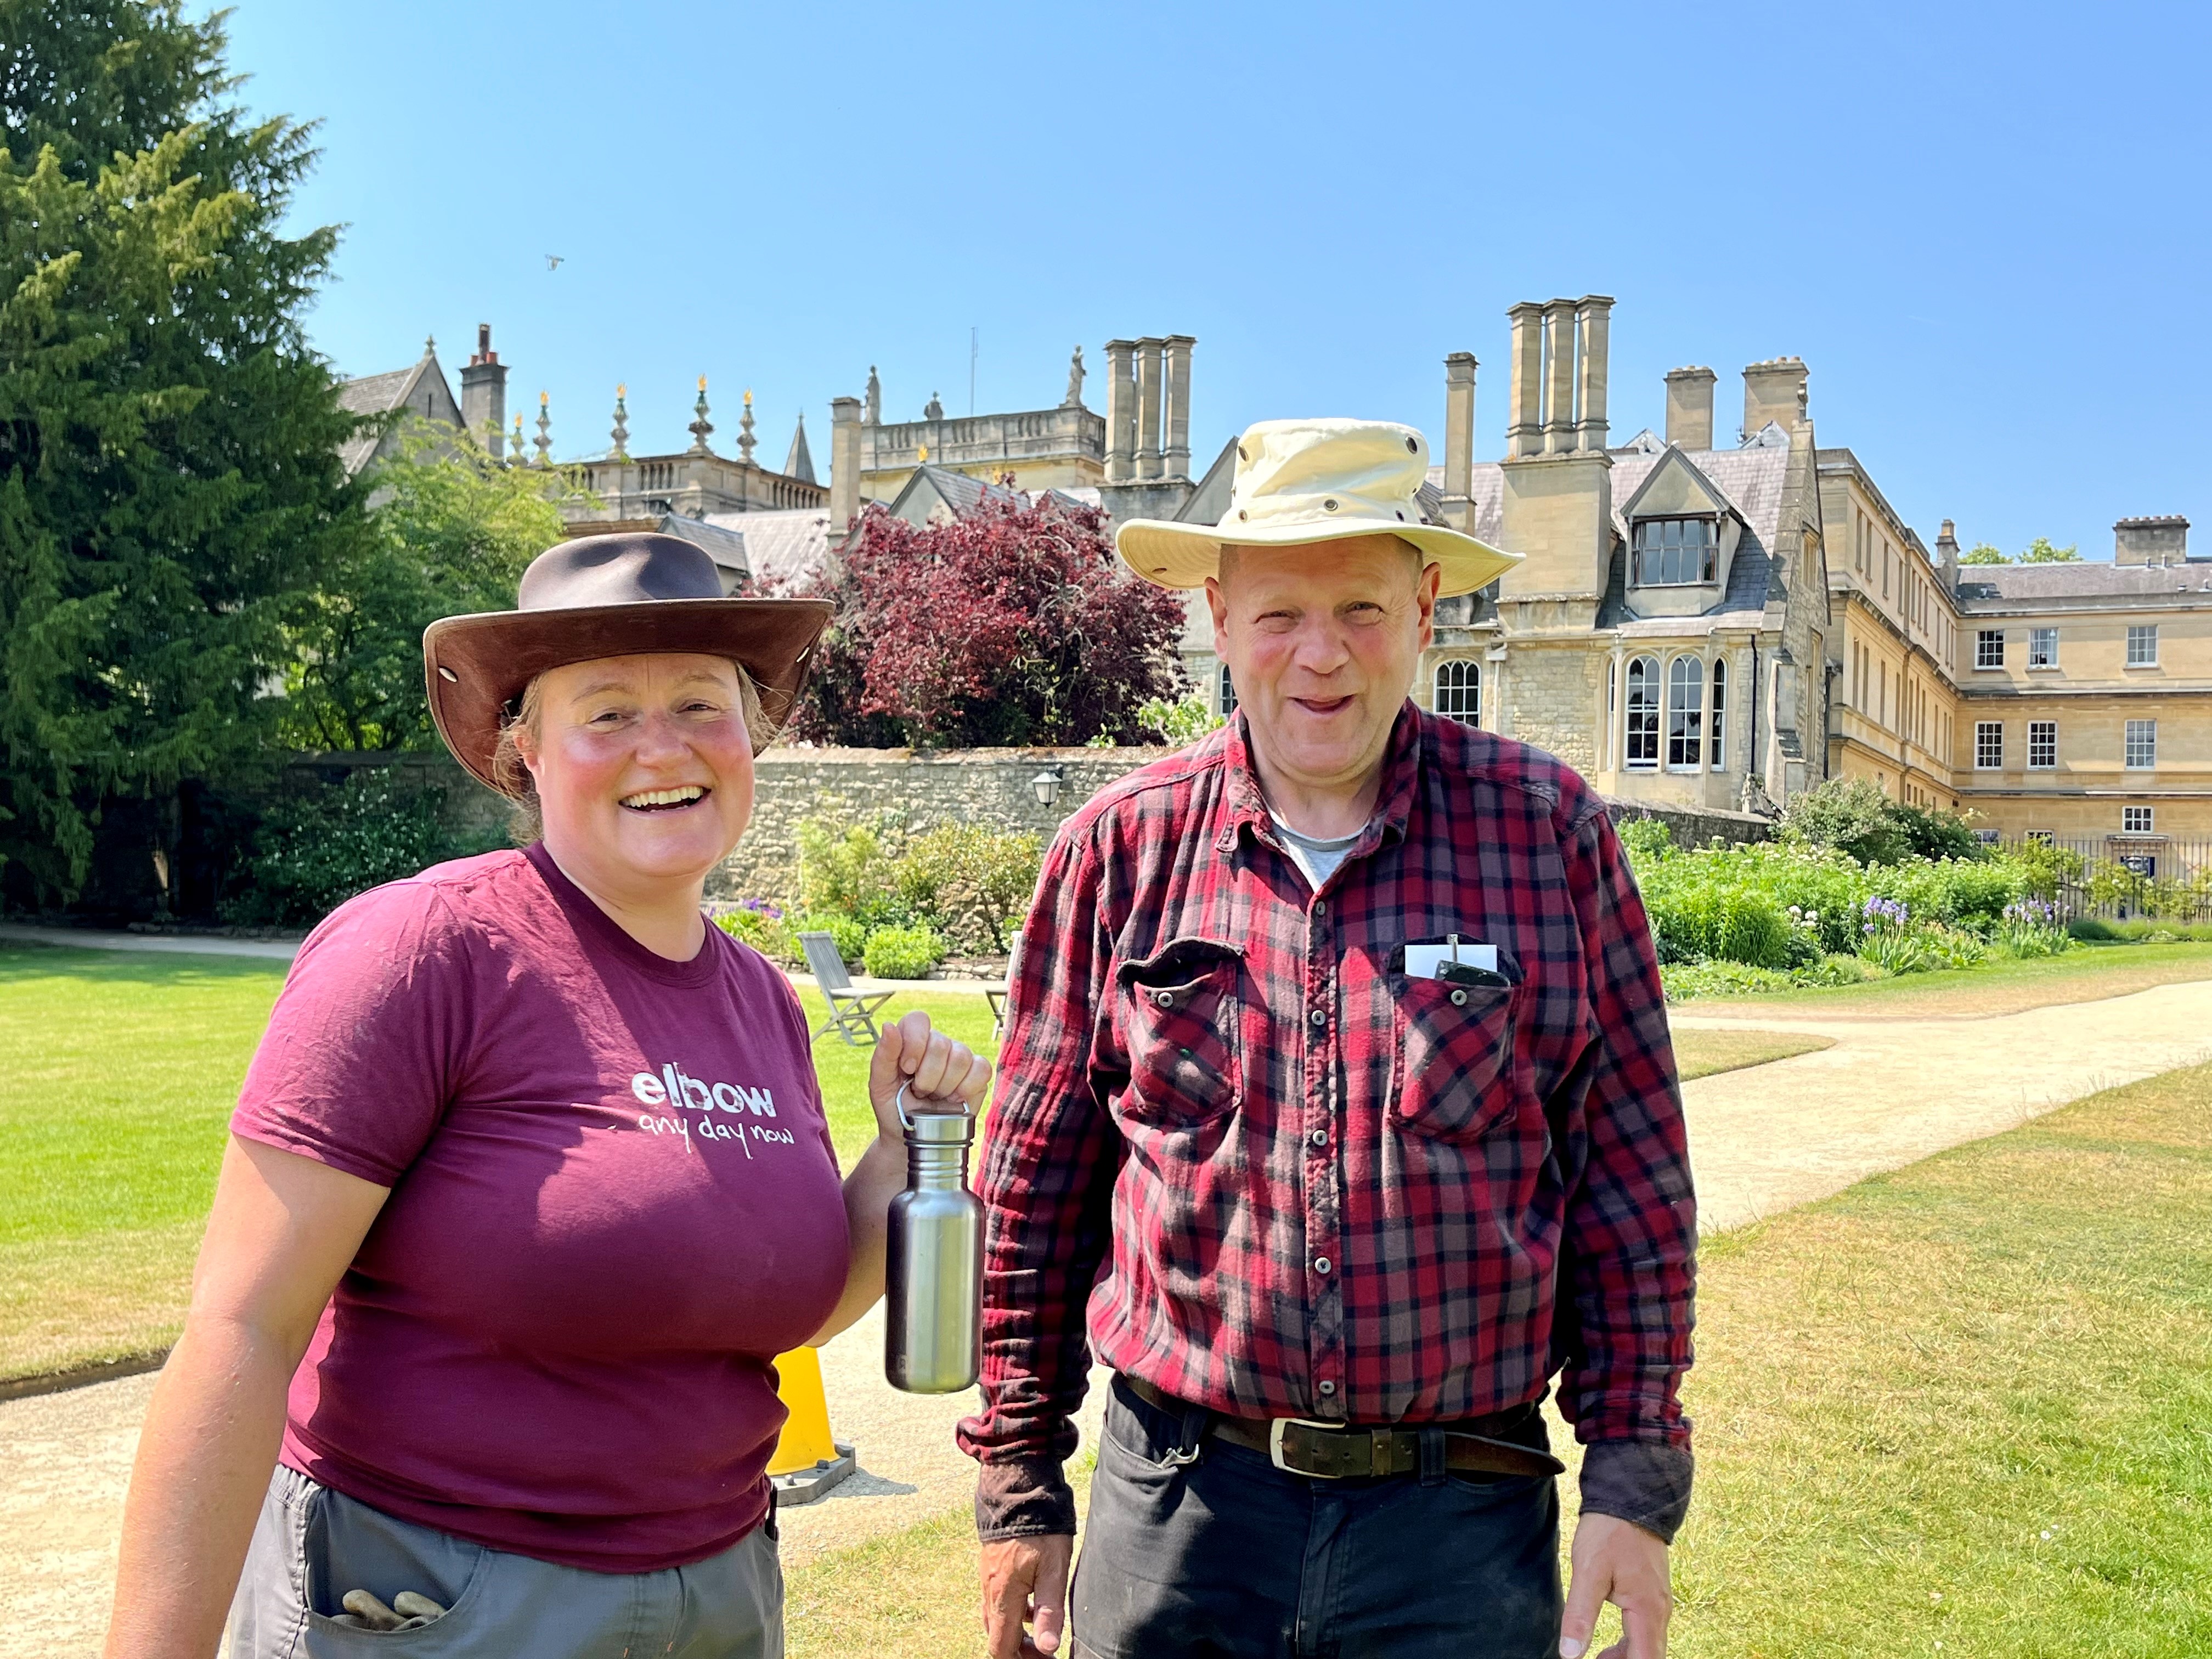 College gardeners Kate and Bob stand in the trinity lawns wearing sun hats and smiling. Kate is holding a bottle of water.